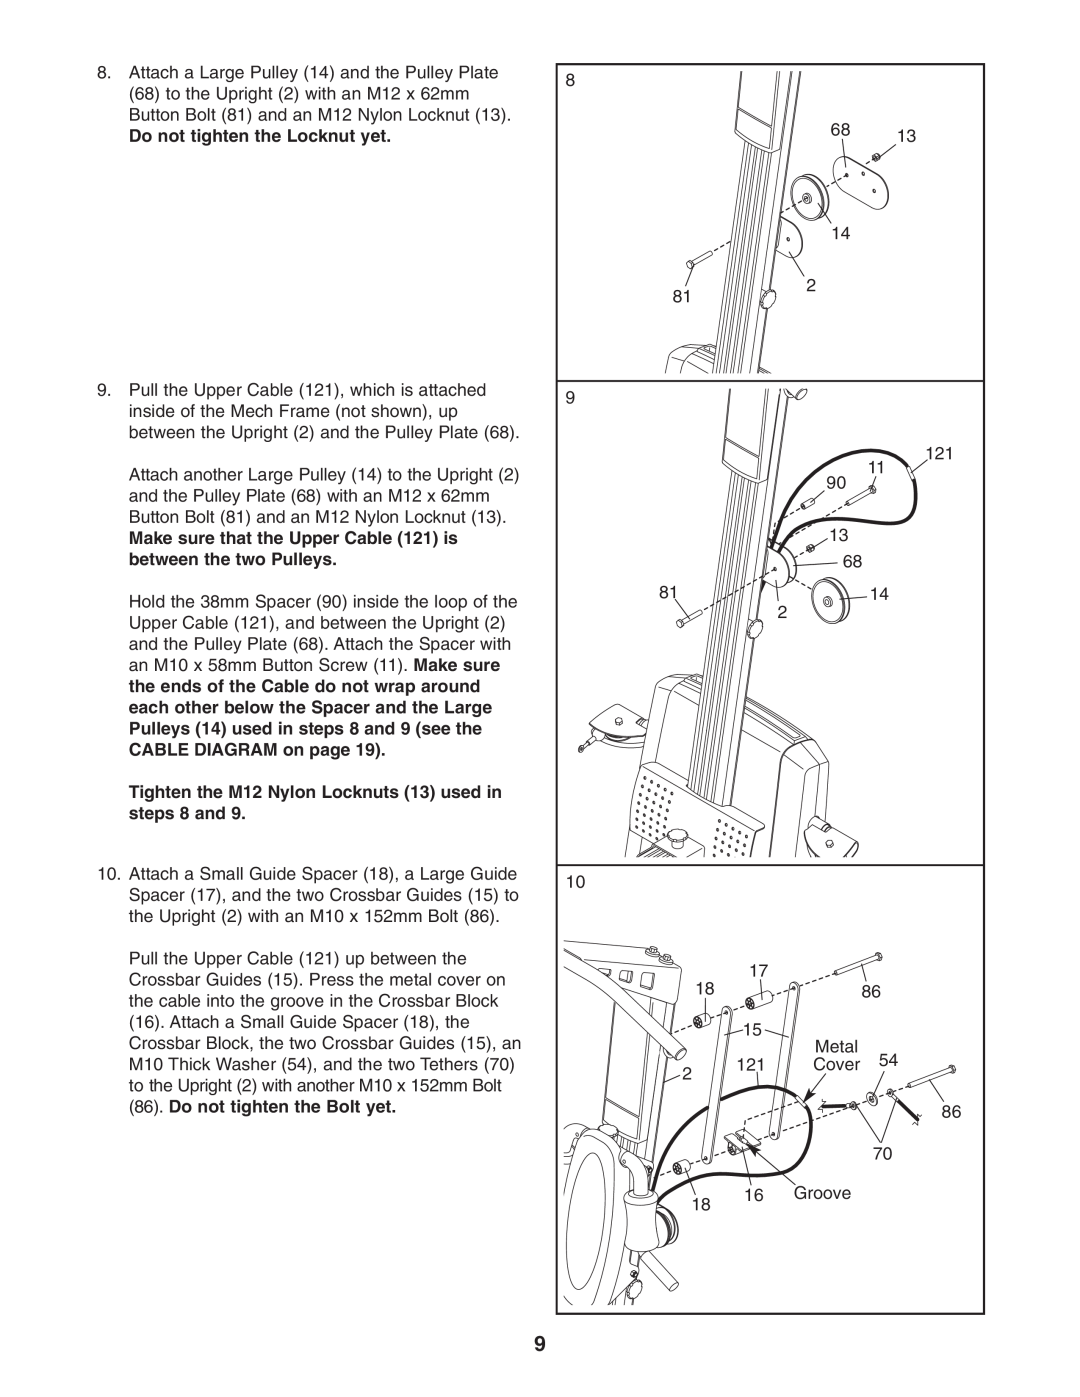 Weider WESY78734 user manual Do not tighten the Locknut yet, Make sure that the Upper Cable 121 is, between the two Pulleys 